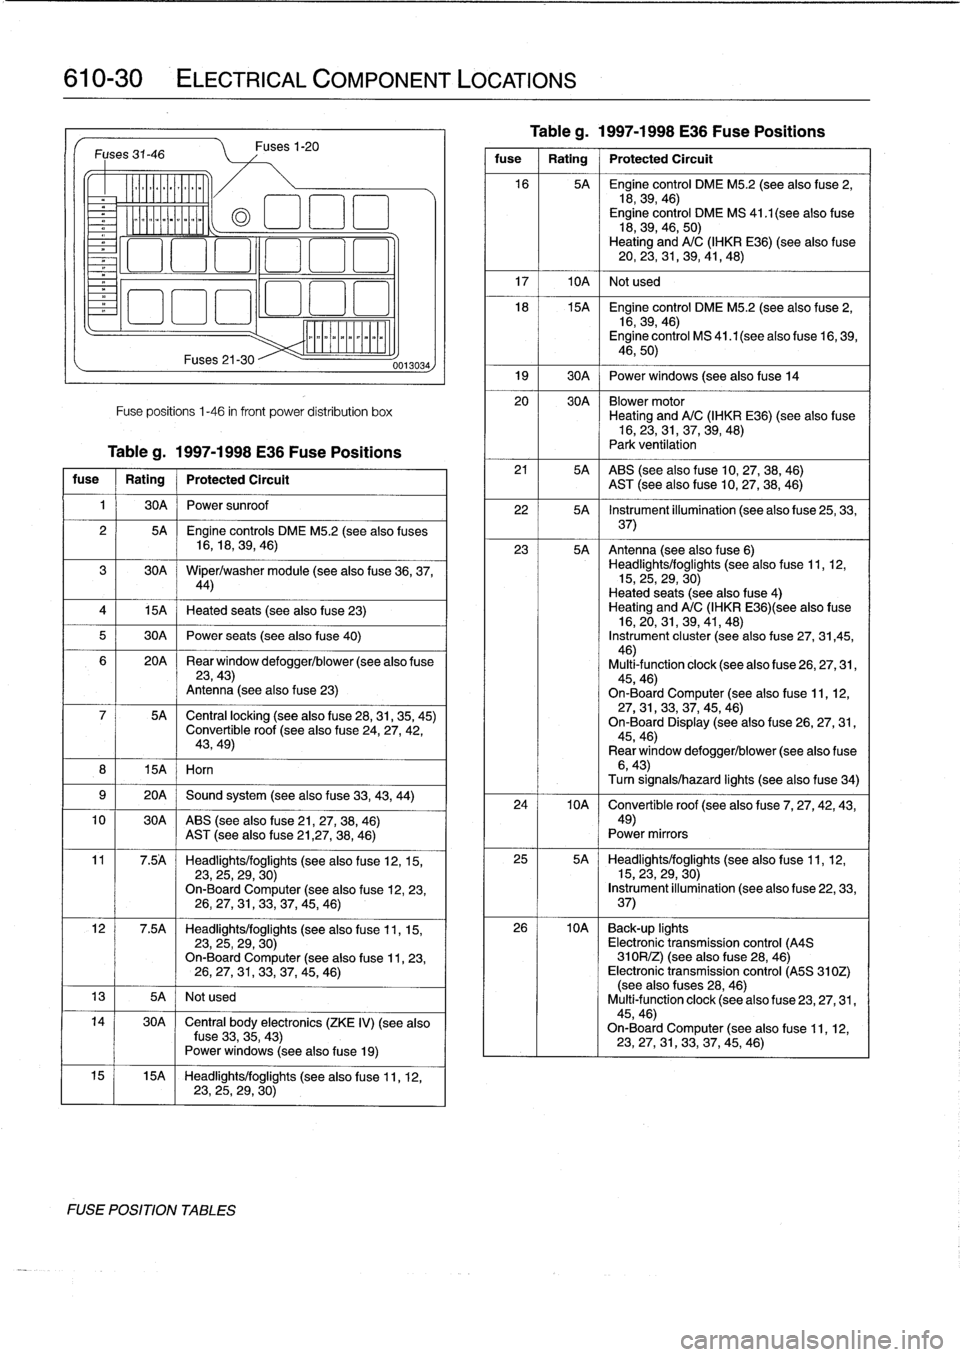 BMW 328i 1994 E36 Workshop Manual 
610-30

	

ELECTRICAL
COMPONENT
LOCATIONS

Fuses
31-46

v

--------------

15A
I
Horn
Fuses21-30

Fuses
1-20

Fuse
positions
1-46
in
front
power
distribution
box

Tableg
.
1997-1998
E36
Fuse
Position